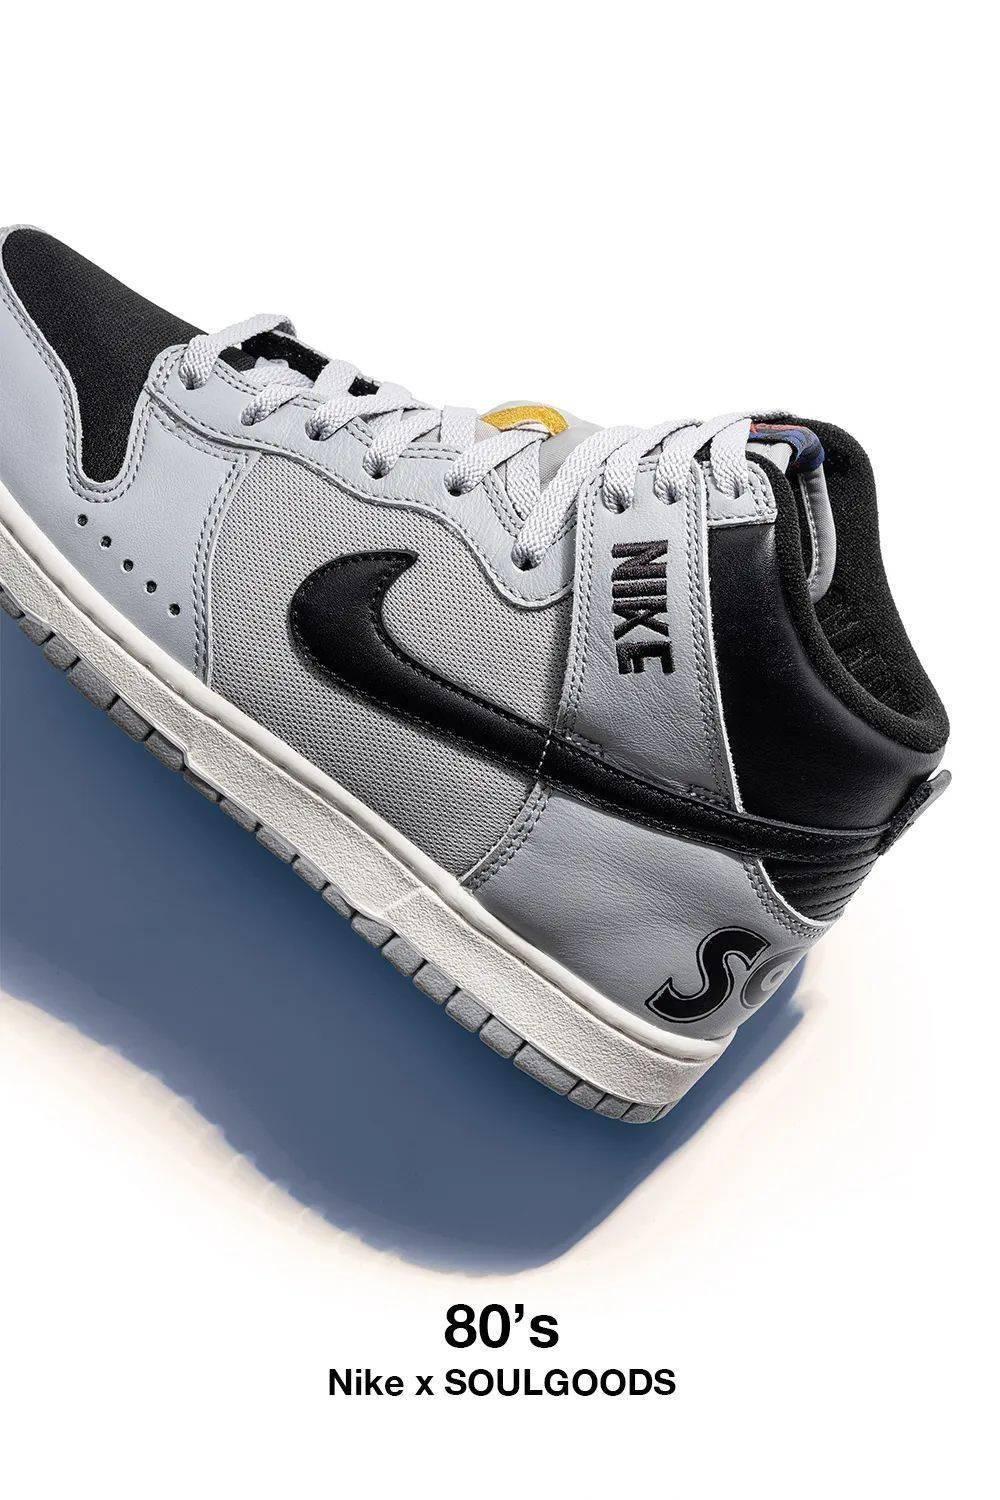 The SOULGOODS x Nike Dunk High Collection Distills Three Decades